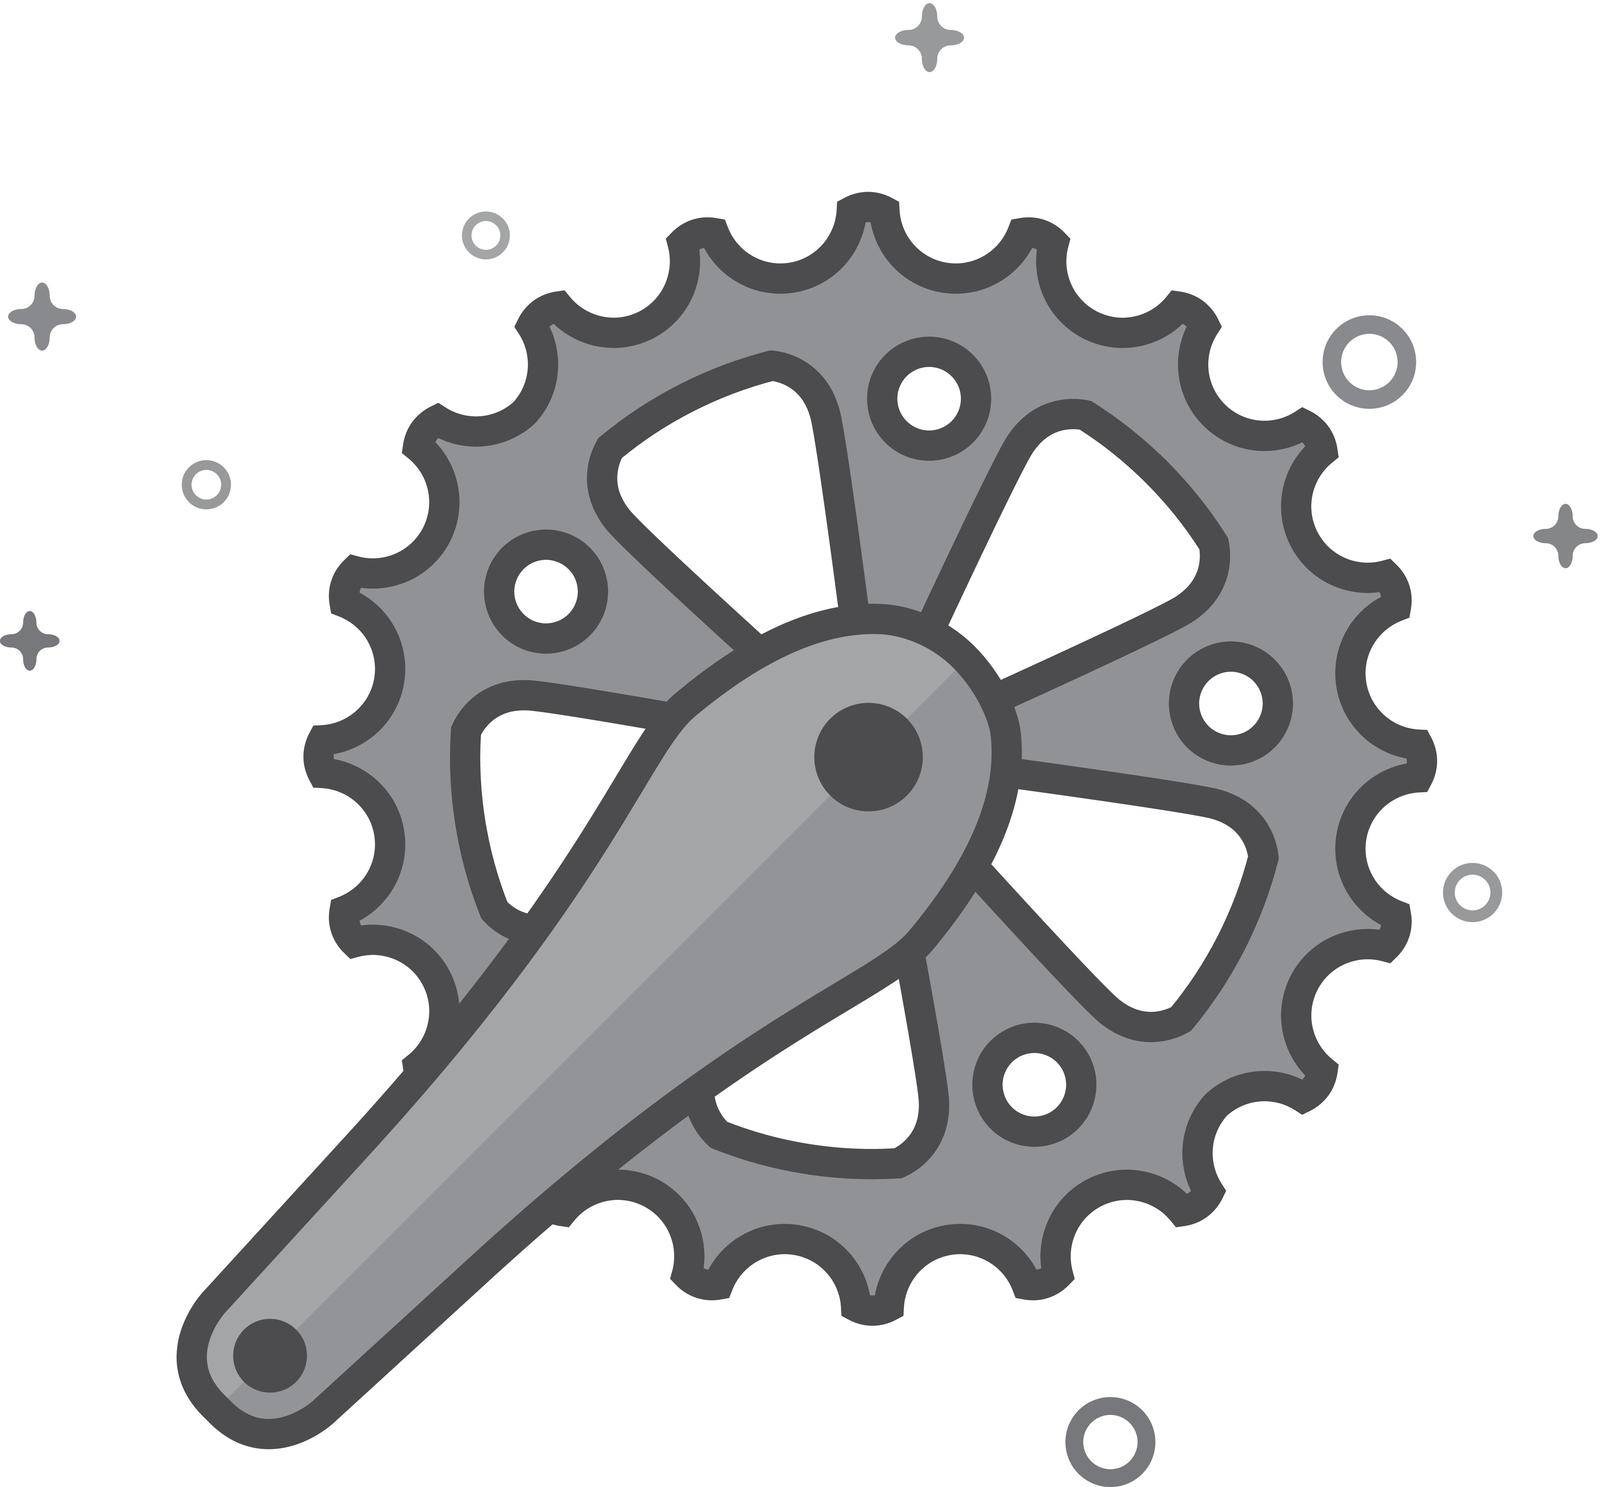 Flat Grayscale Icon - Bicycle crank set by puruan